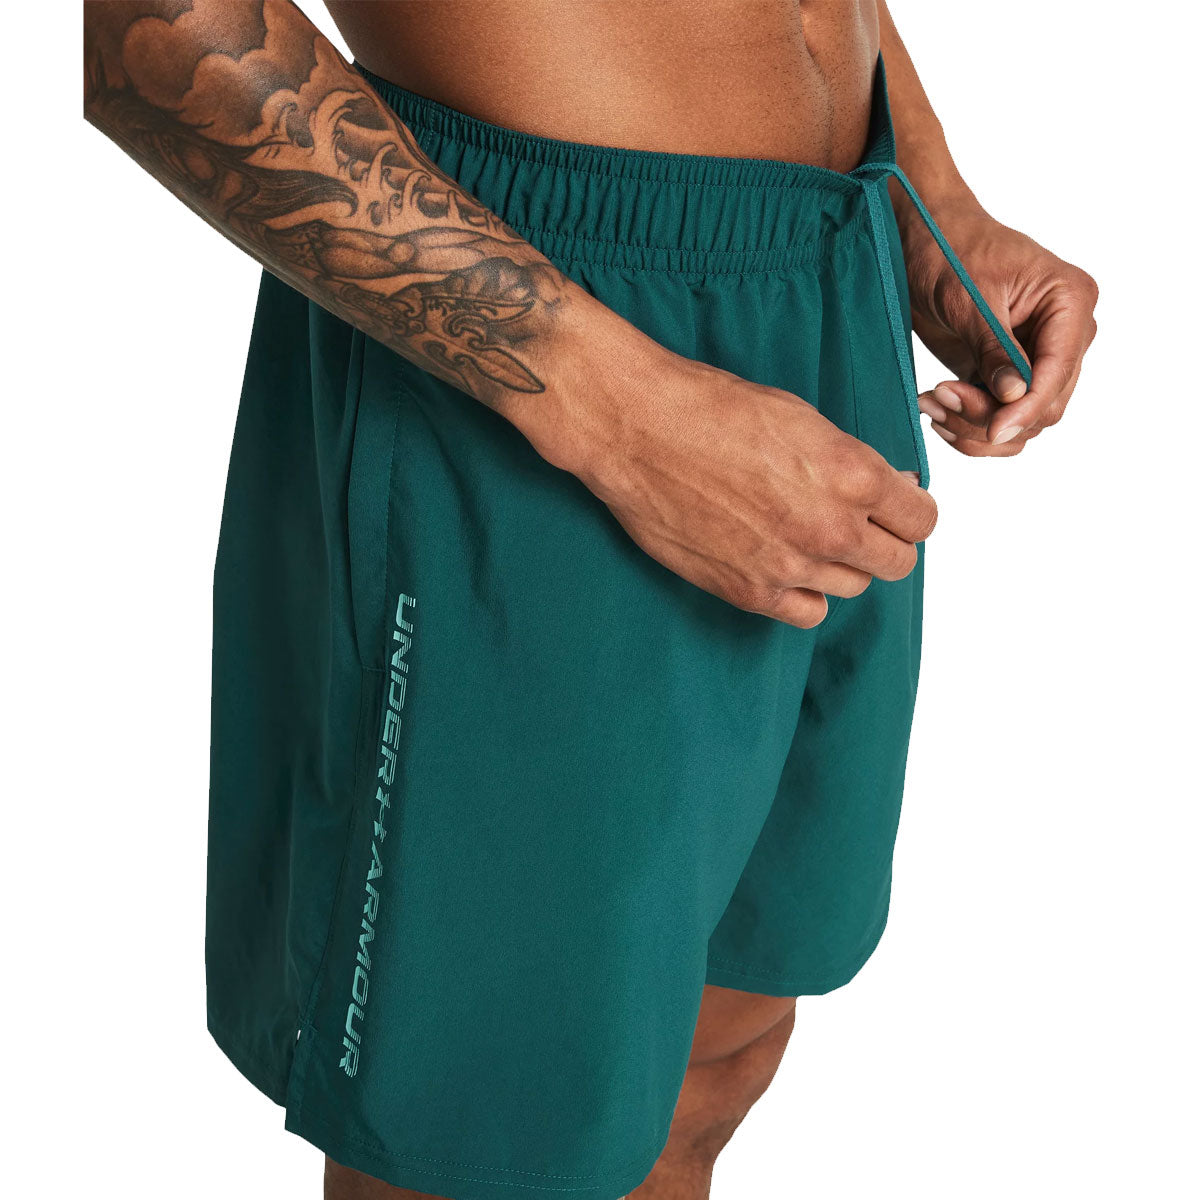 Under Armour Woven Woodmark Shorts - Mens - Hydro Teal/Radial Turquoise